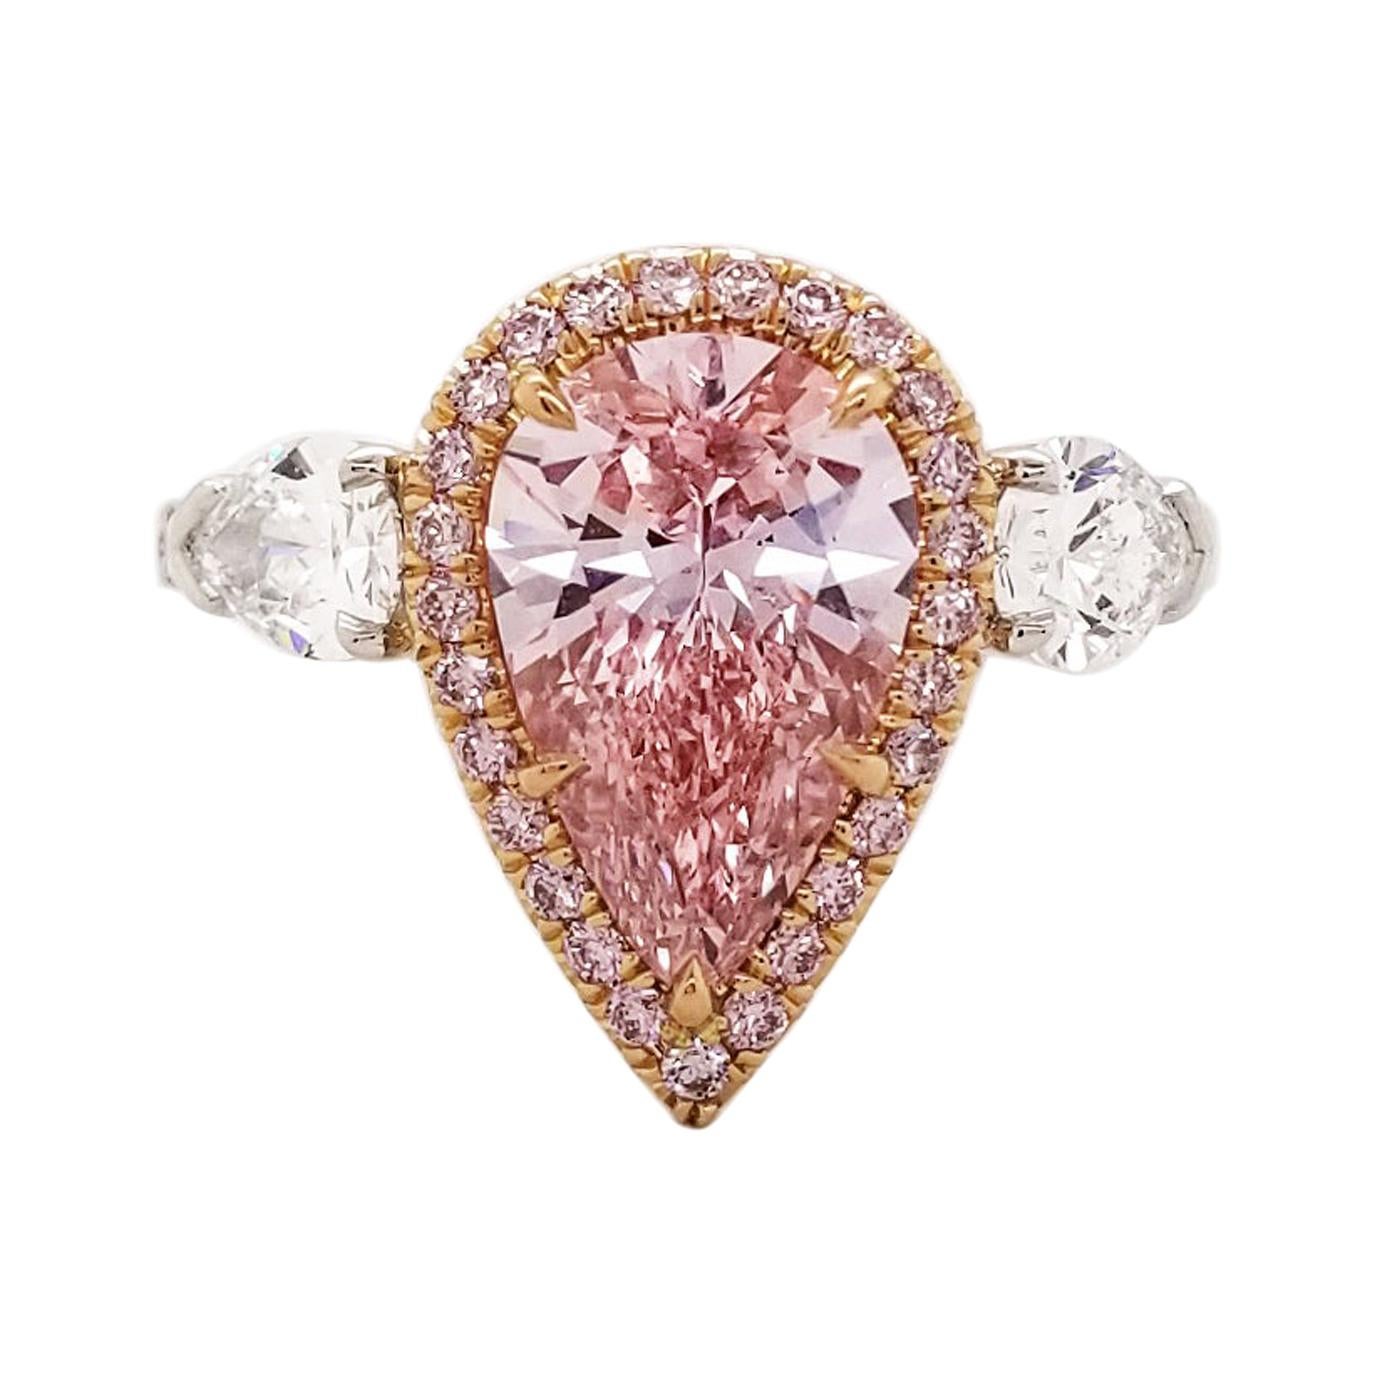 Scarselli 2 Carat Pear Shape Pink Diamond Ring in Platinum and 18k Goldralds For Sale